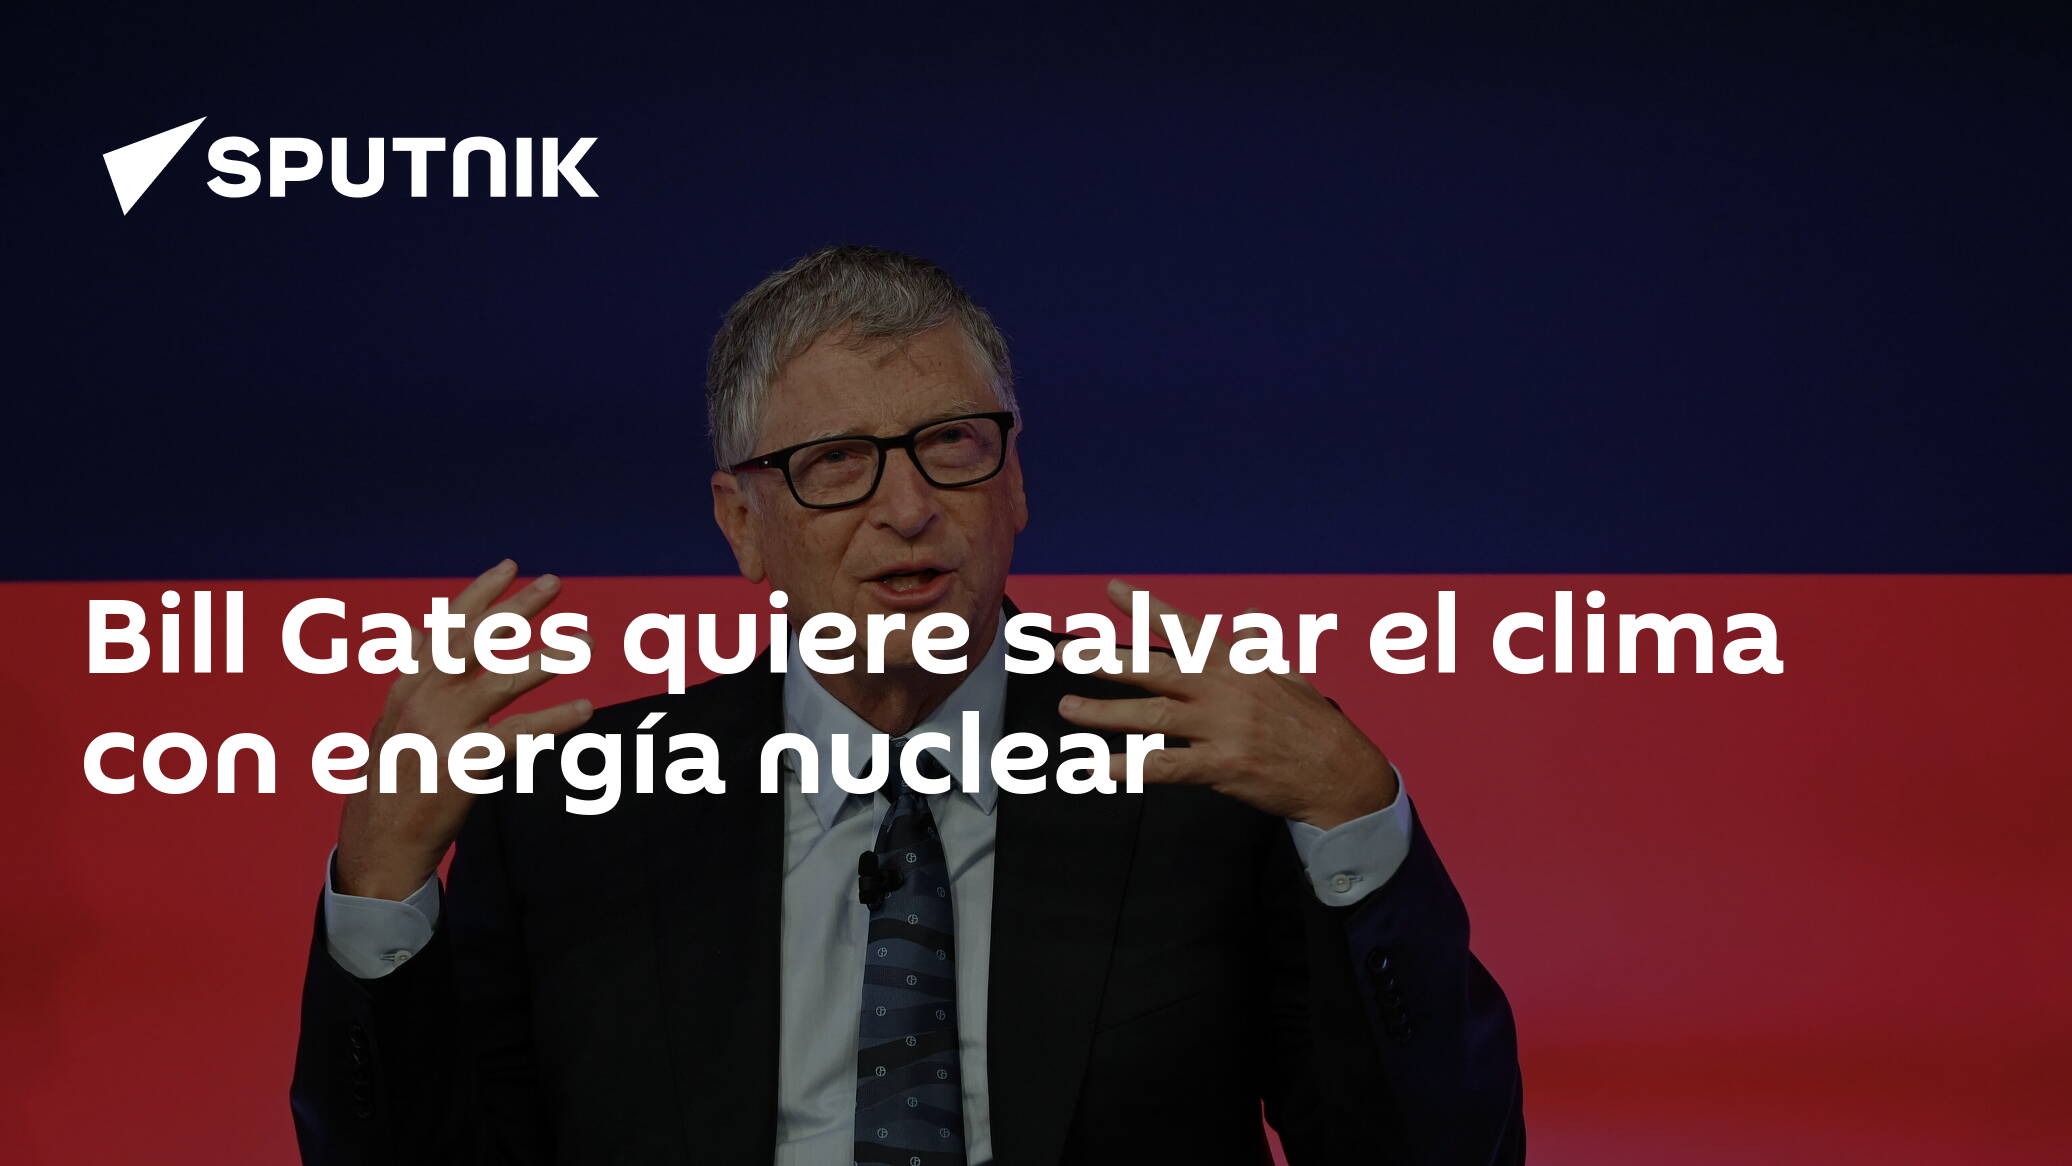 Bill Gates wants to save the climate with nuclear energy

